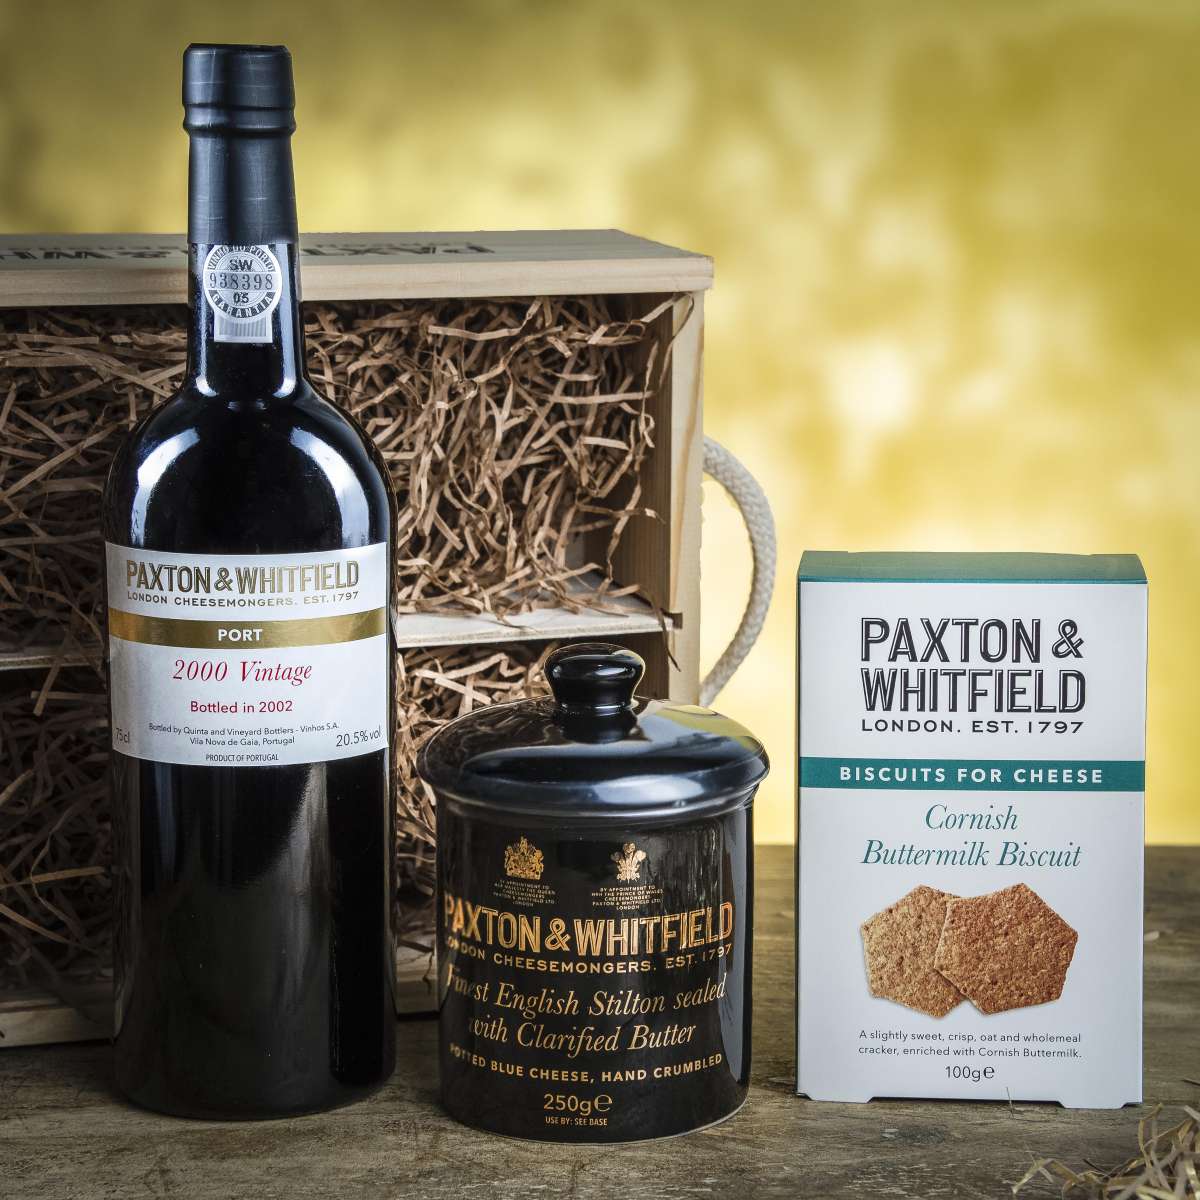 Cheese Hampers and Gifts | Paxton and Whitfield | Paxton & Whitfield